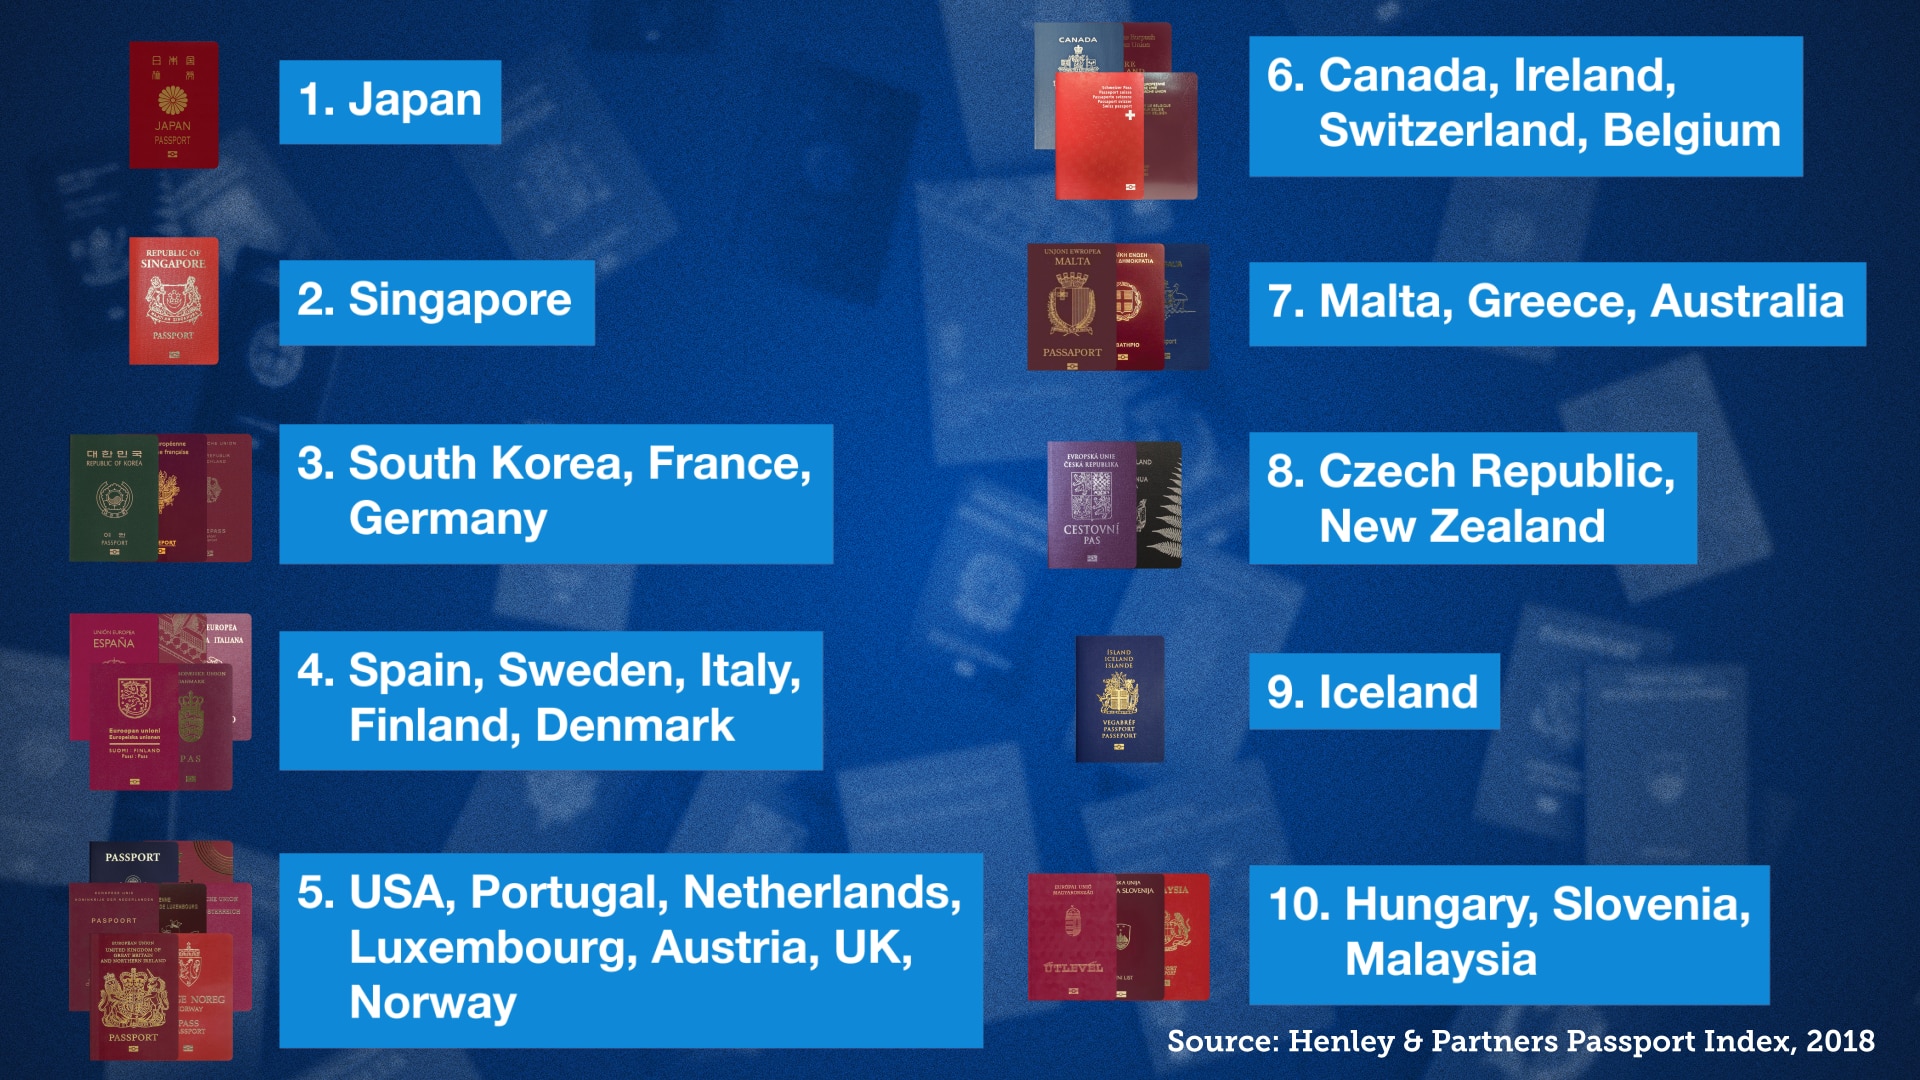 The most powerful passports based on visa-free access or visa-on-arrival access.